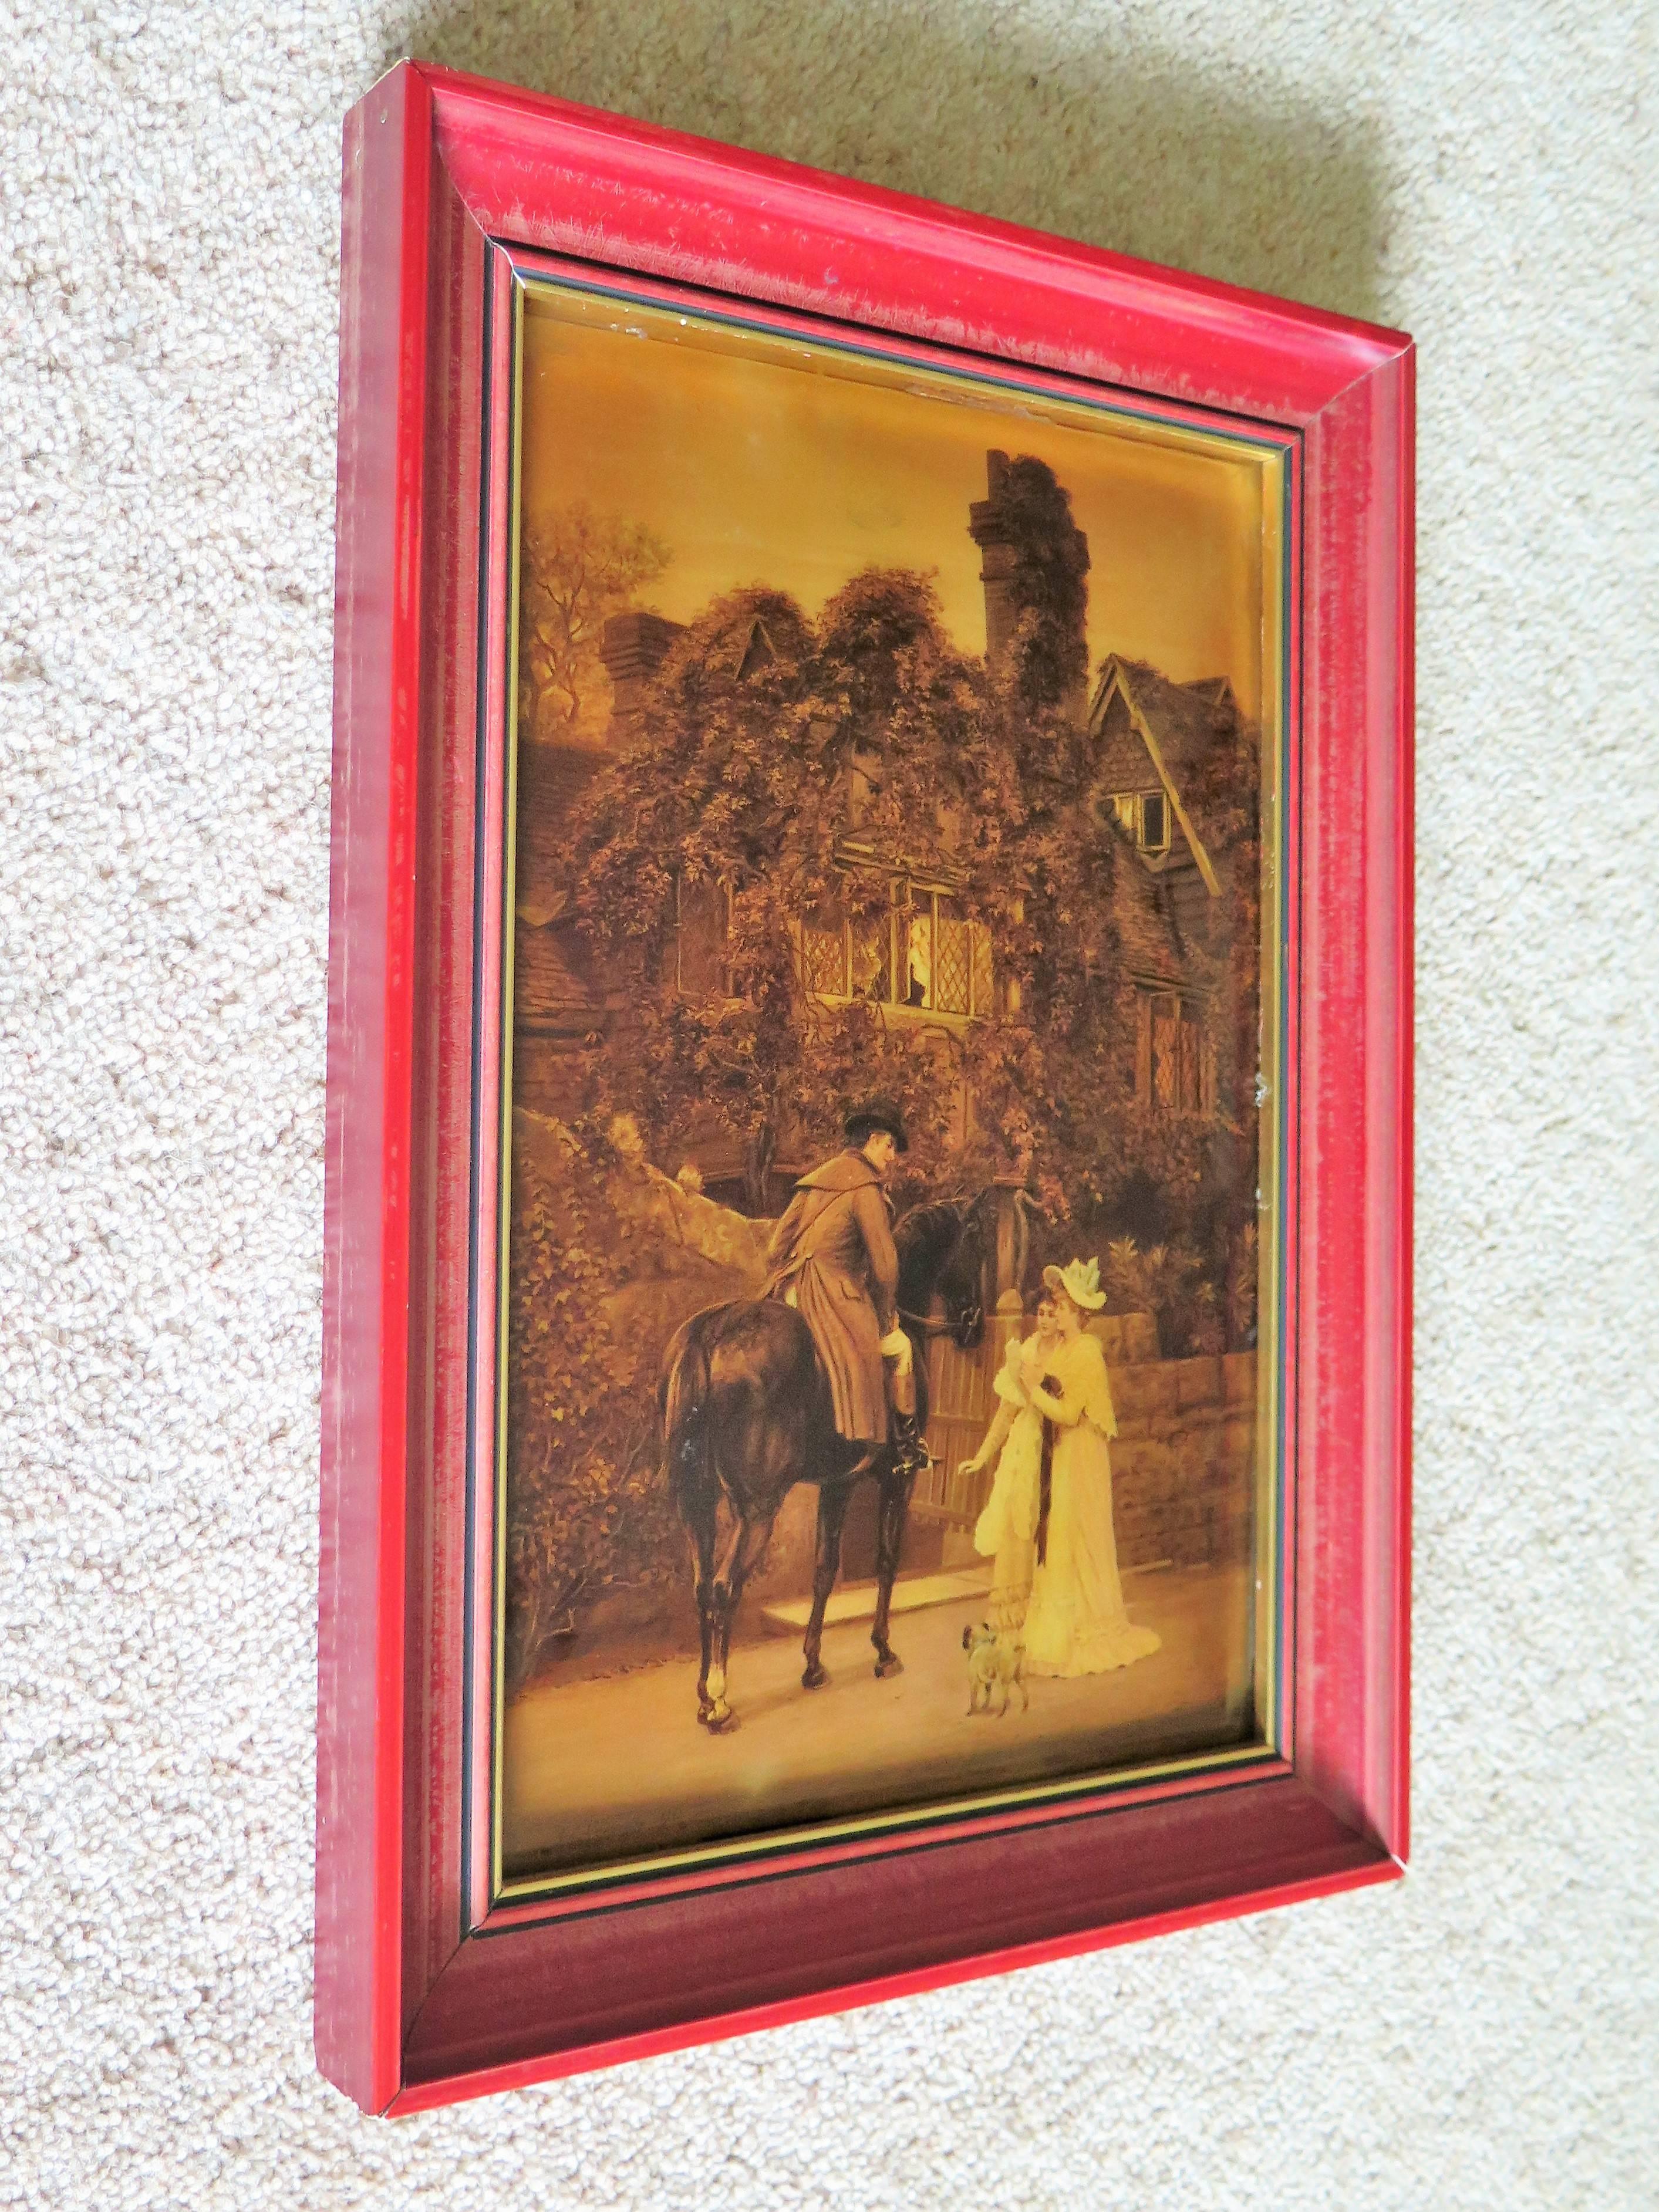 This is a very decorative Victorian period Crystoleum picture after A L Vernon called The Messenger to The Heiress and dating to the late Victorian period, 1896 

The crystoleum is in a red painted wood frame.

Arthur Langley or Longley Vernon was a